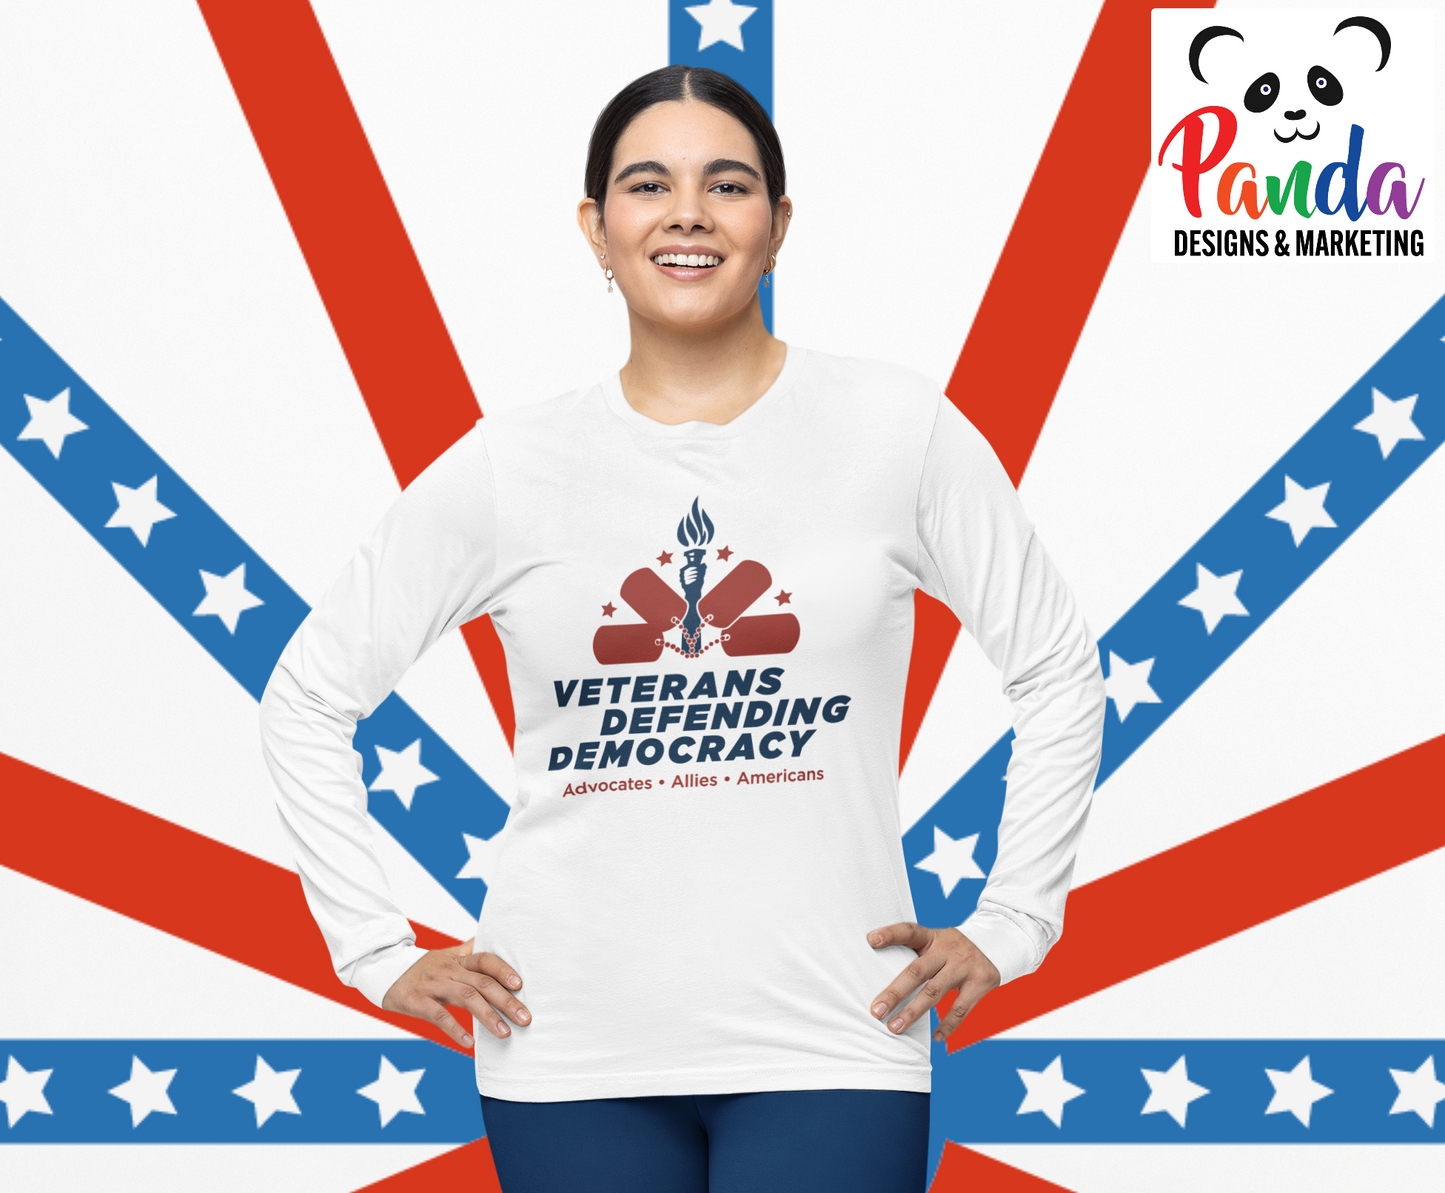 Woman waring white long sleeve sublimated shirt with the Veterans Defending Democracy logo.  The logo is blue and red and features a hand holding a torch with a half circle arch of dog tags and stars.  The text Advocates . Allies. Americans is under the logo. 